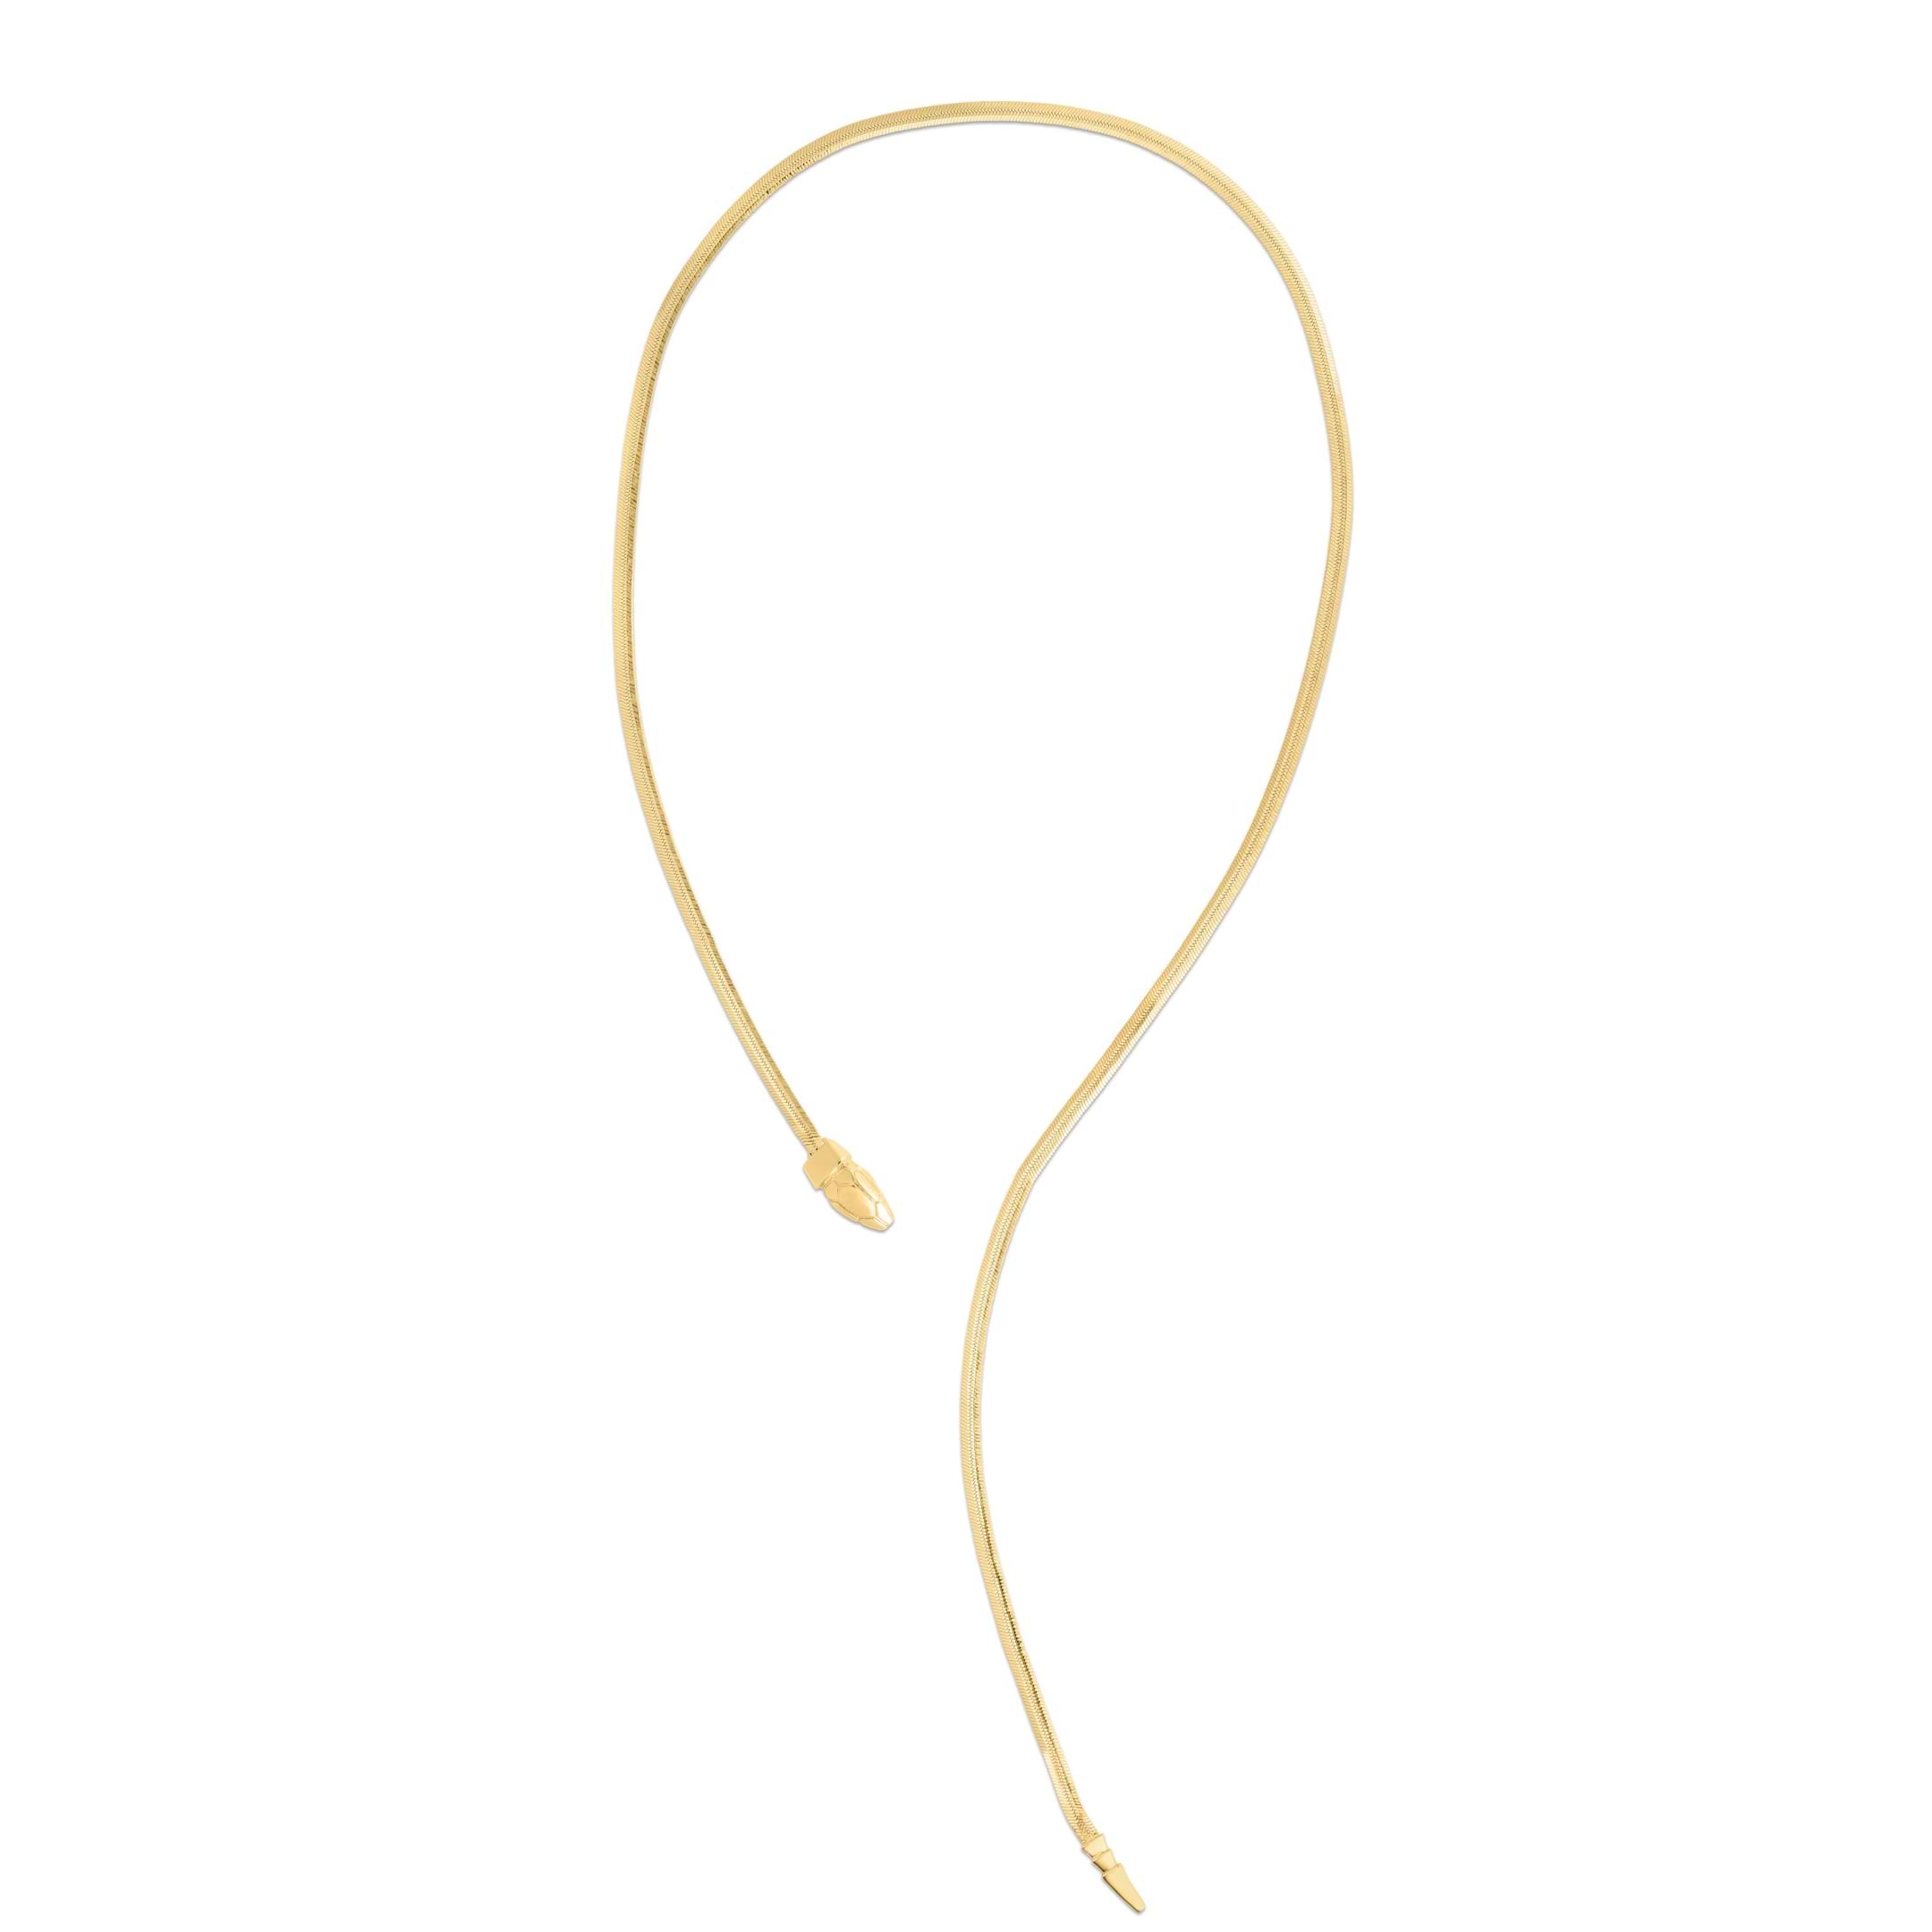 Serpant with adjustable head clasp Pendant Necklace 14K Yellow Gold